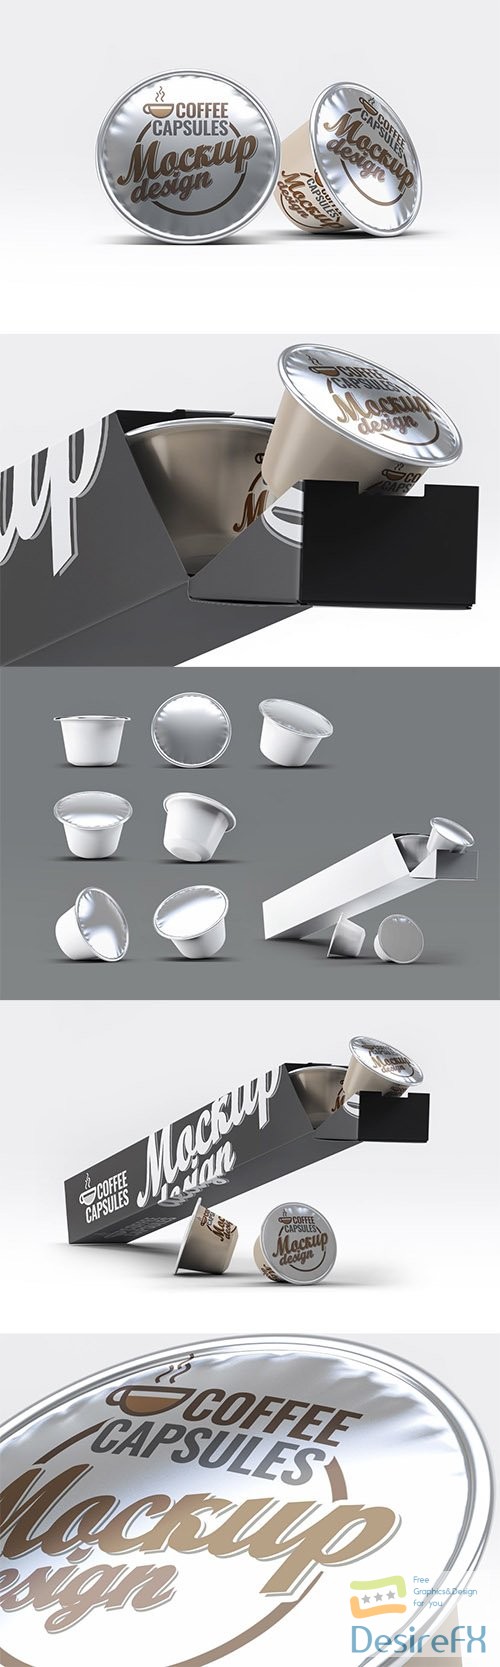 PSD Coffee Capsules Mock-Up